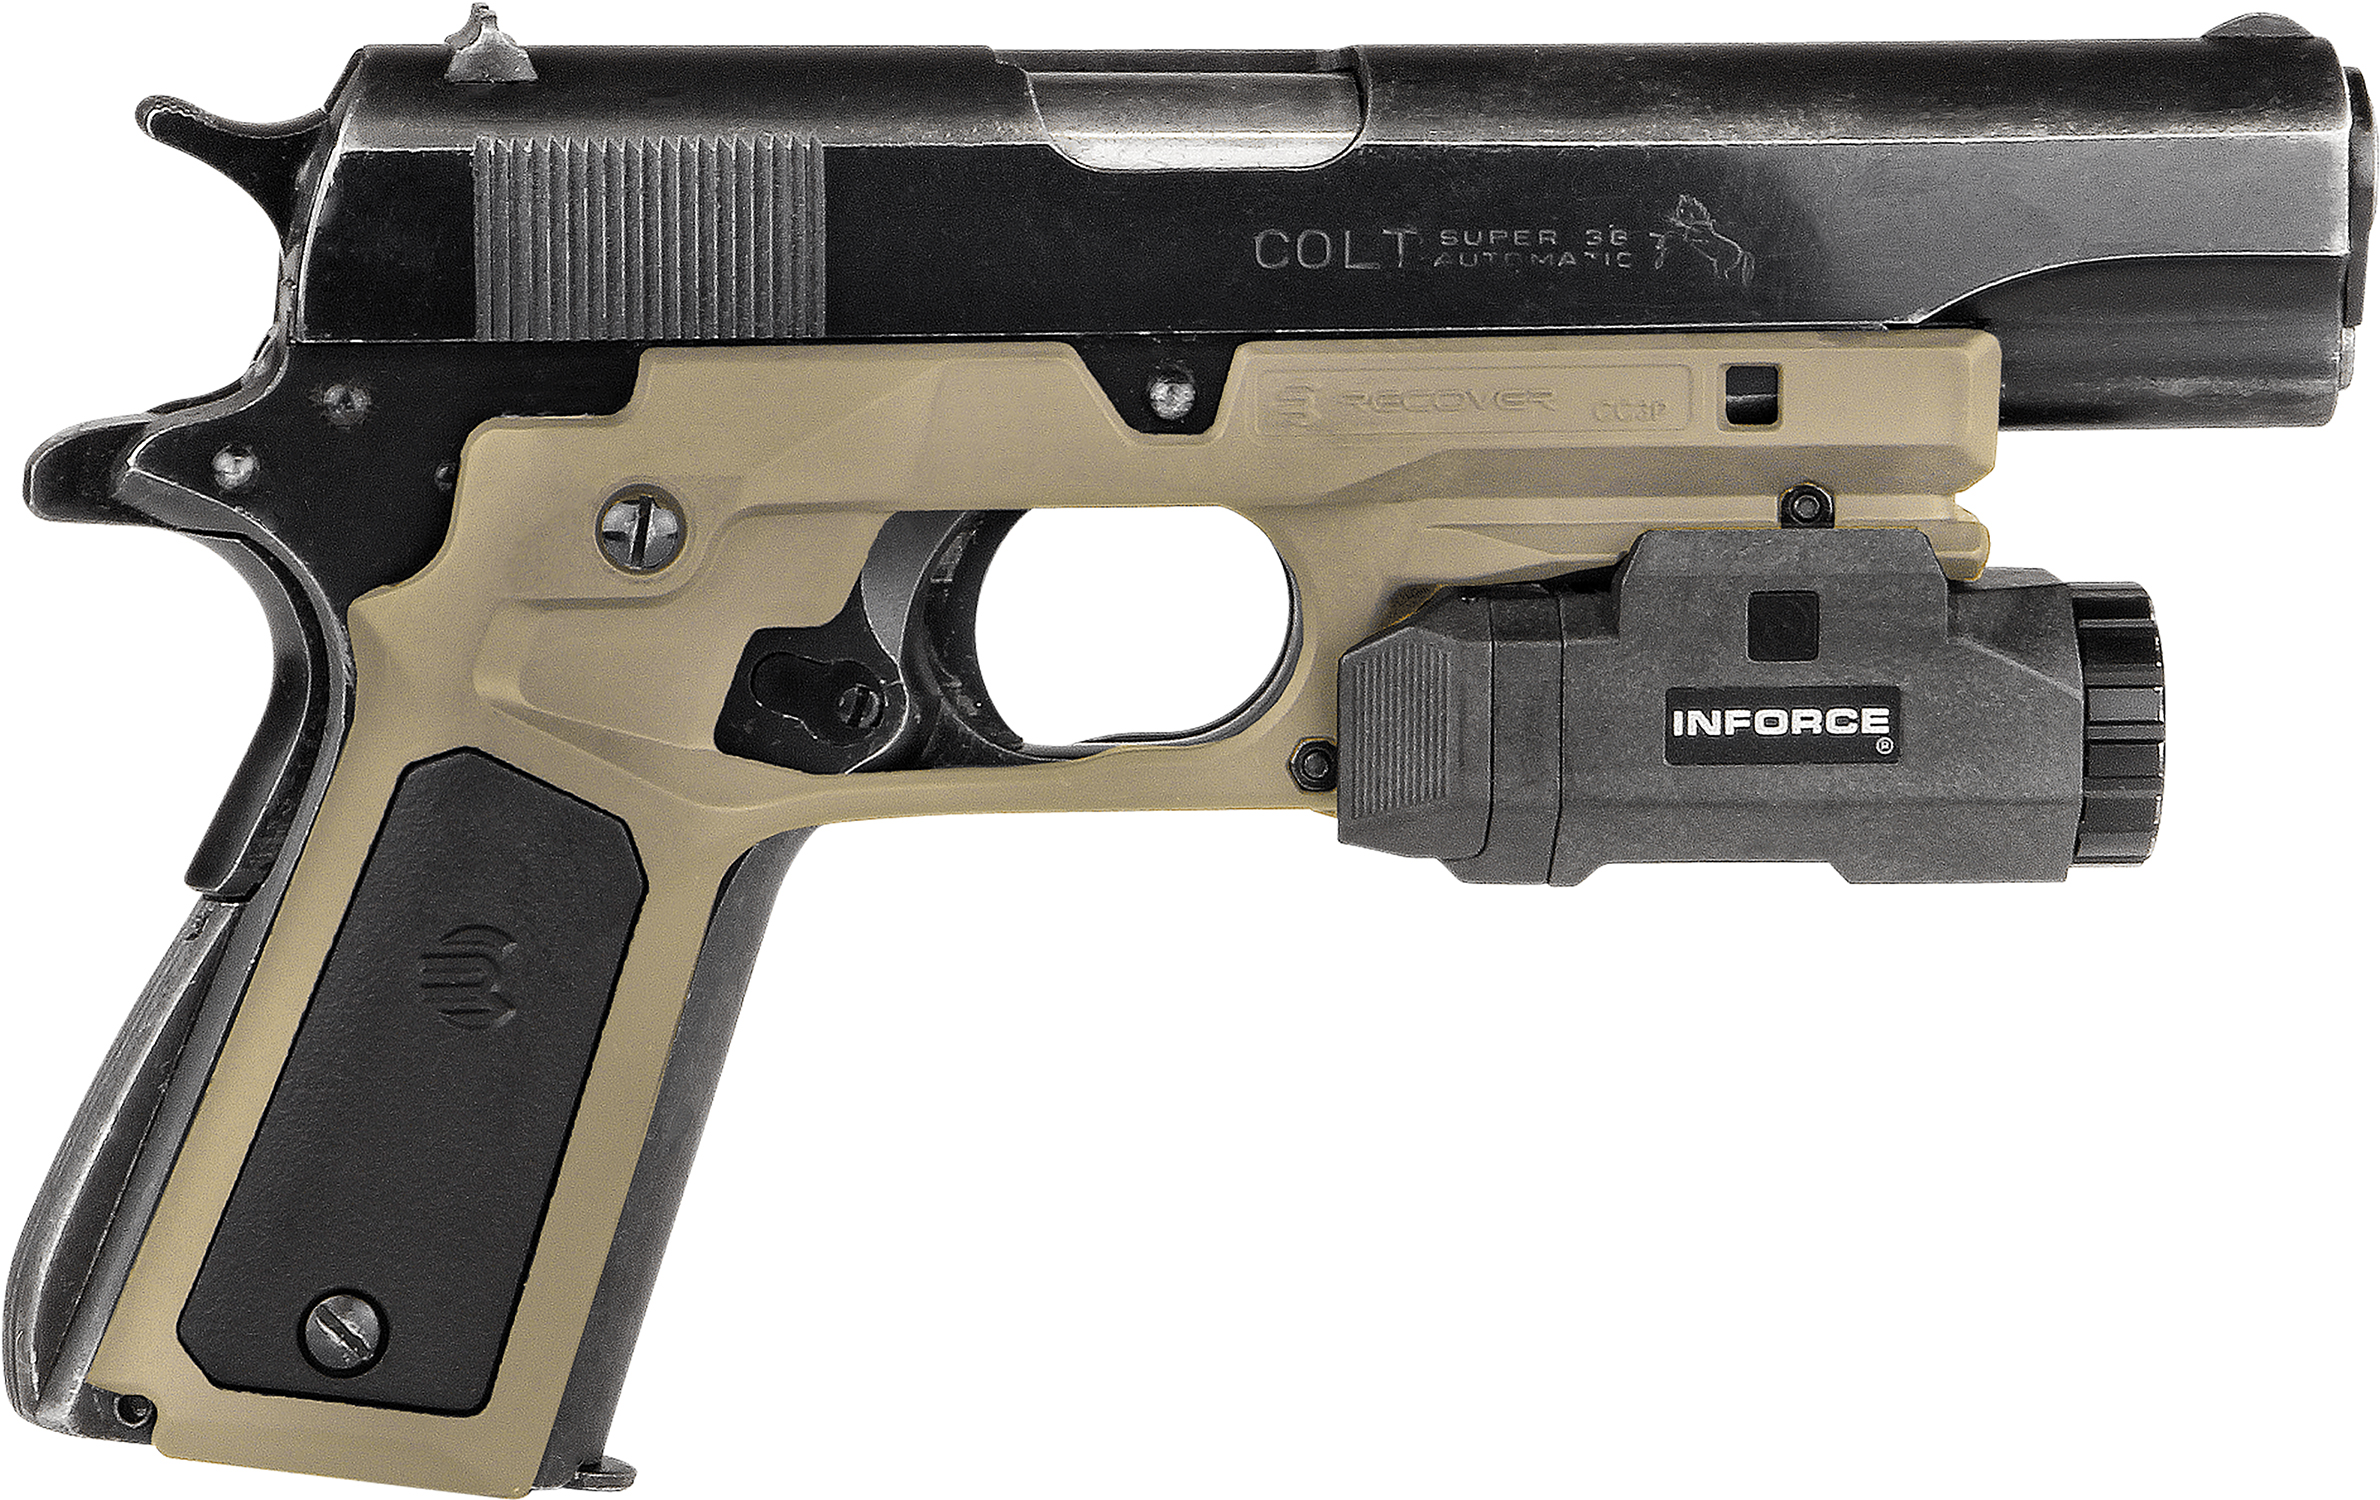 Recover Tactical CC3P0201 Frame Grip  Tan Polymer Frame with Interchangeable Black & Tan Panels for Standard Frame 1911